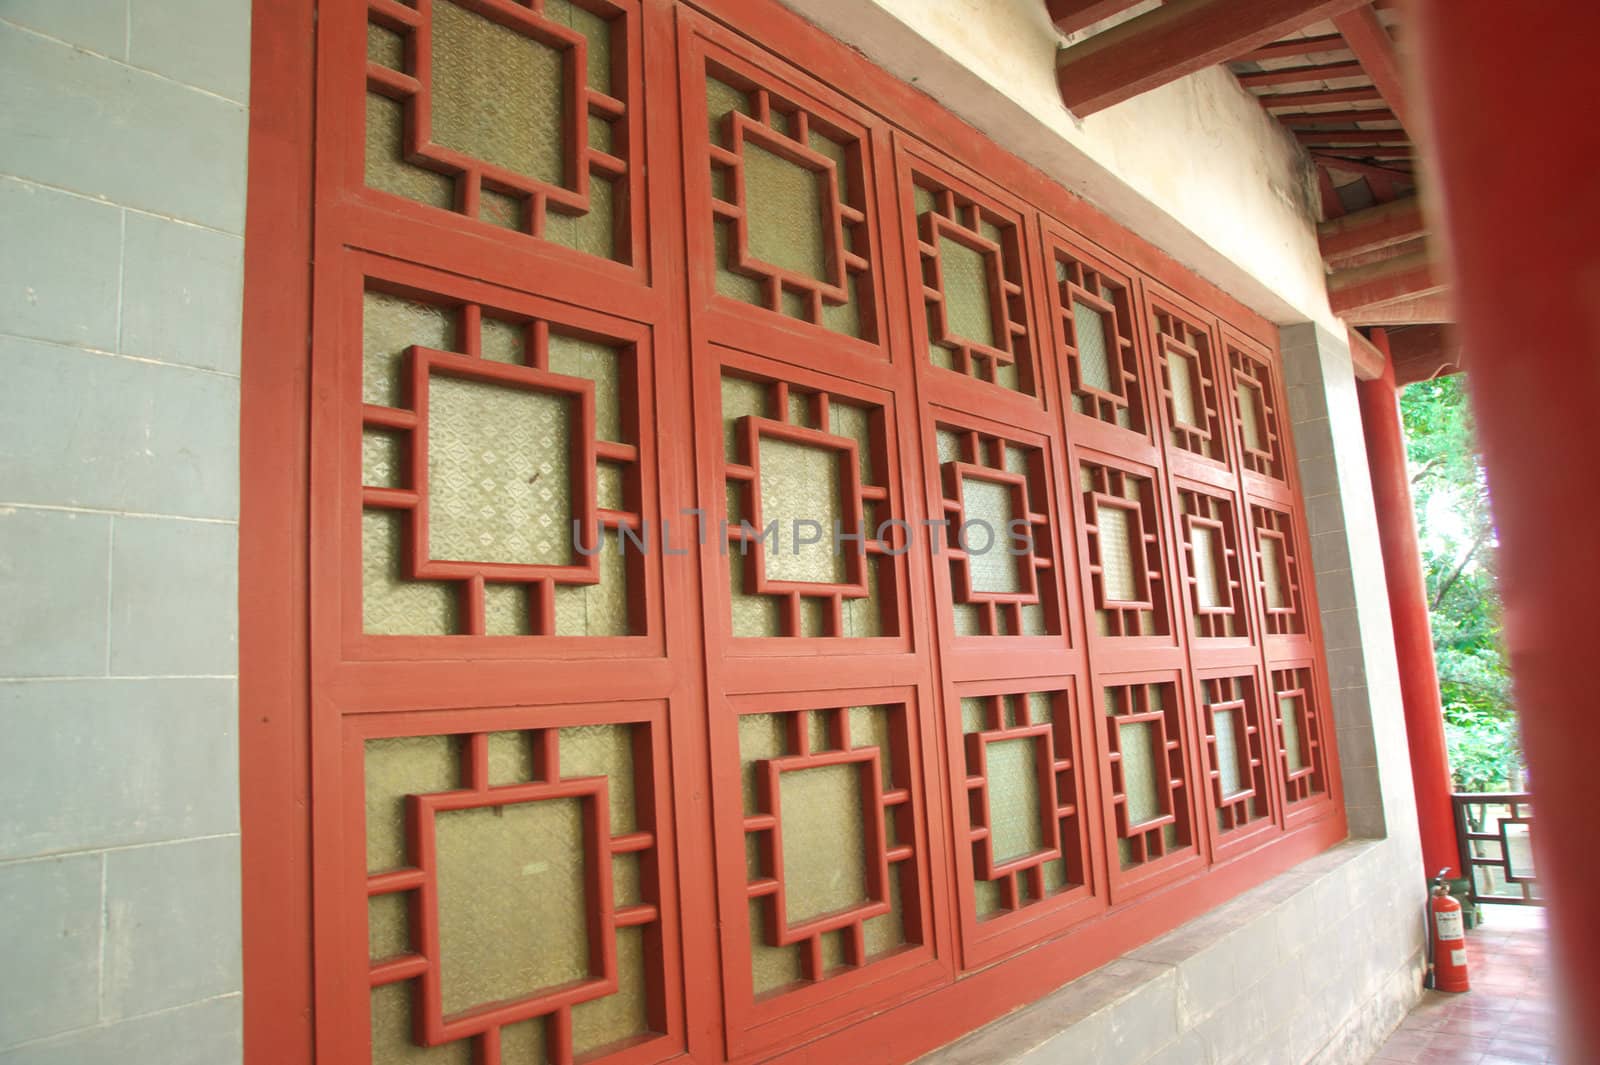 Classical Chinese architecture of the windows are very pretty, very elegant design